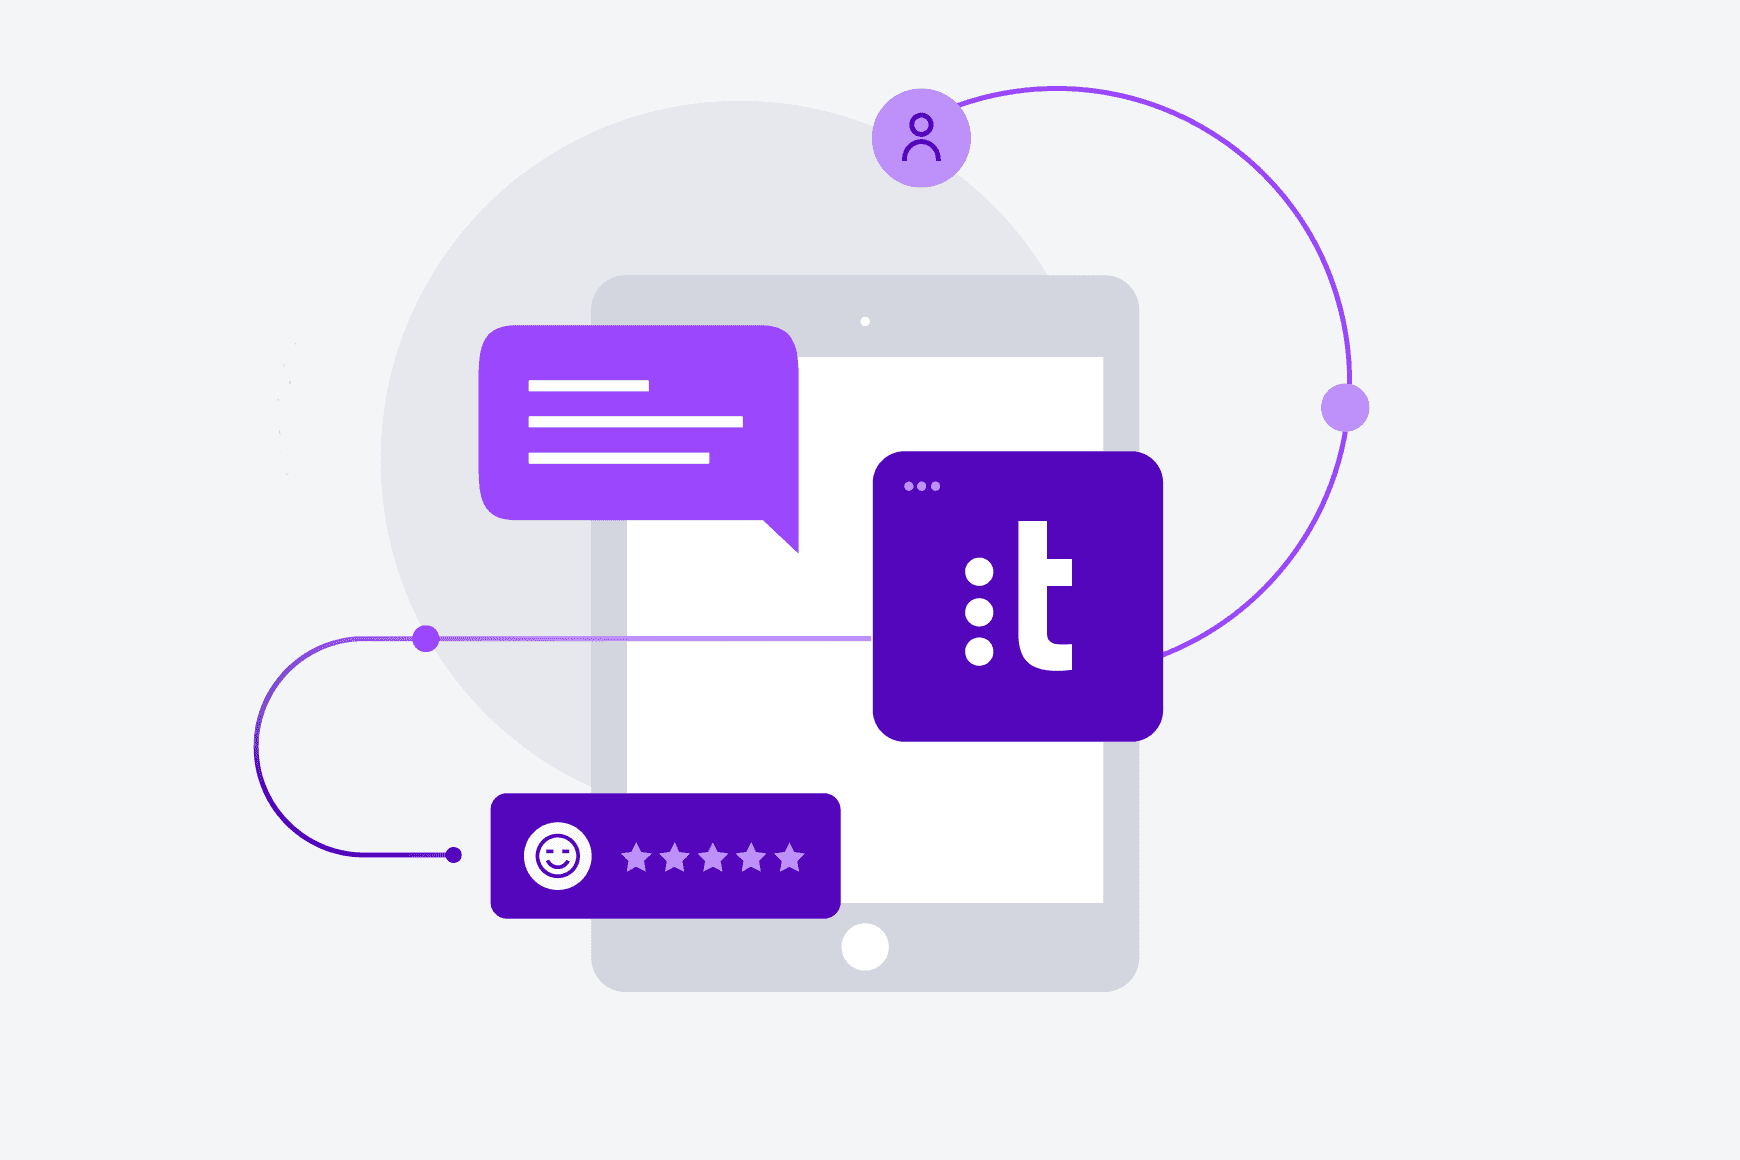 Why people are talking about Talkdesk